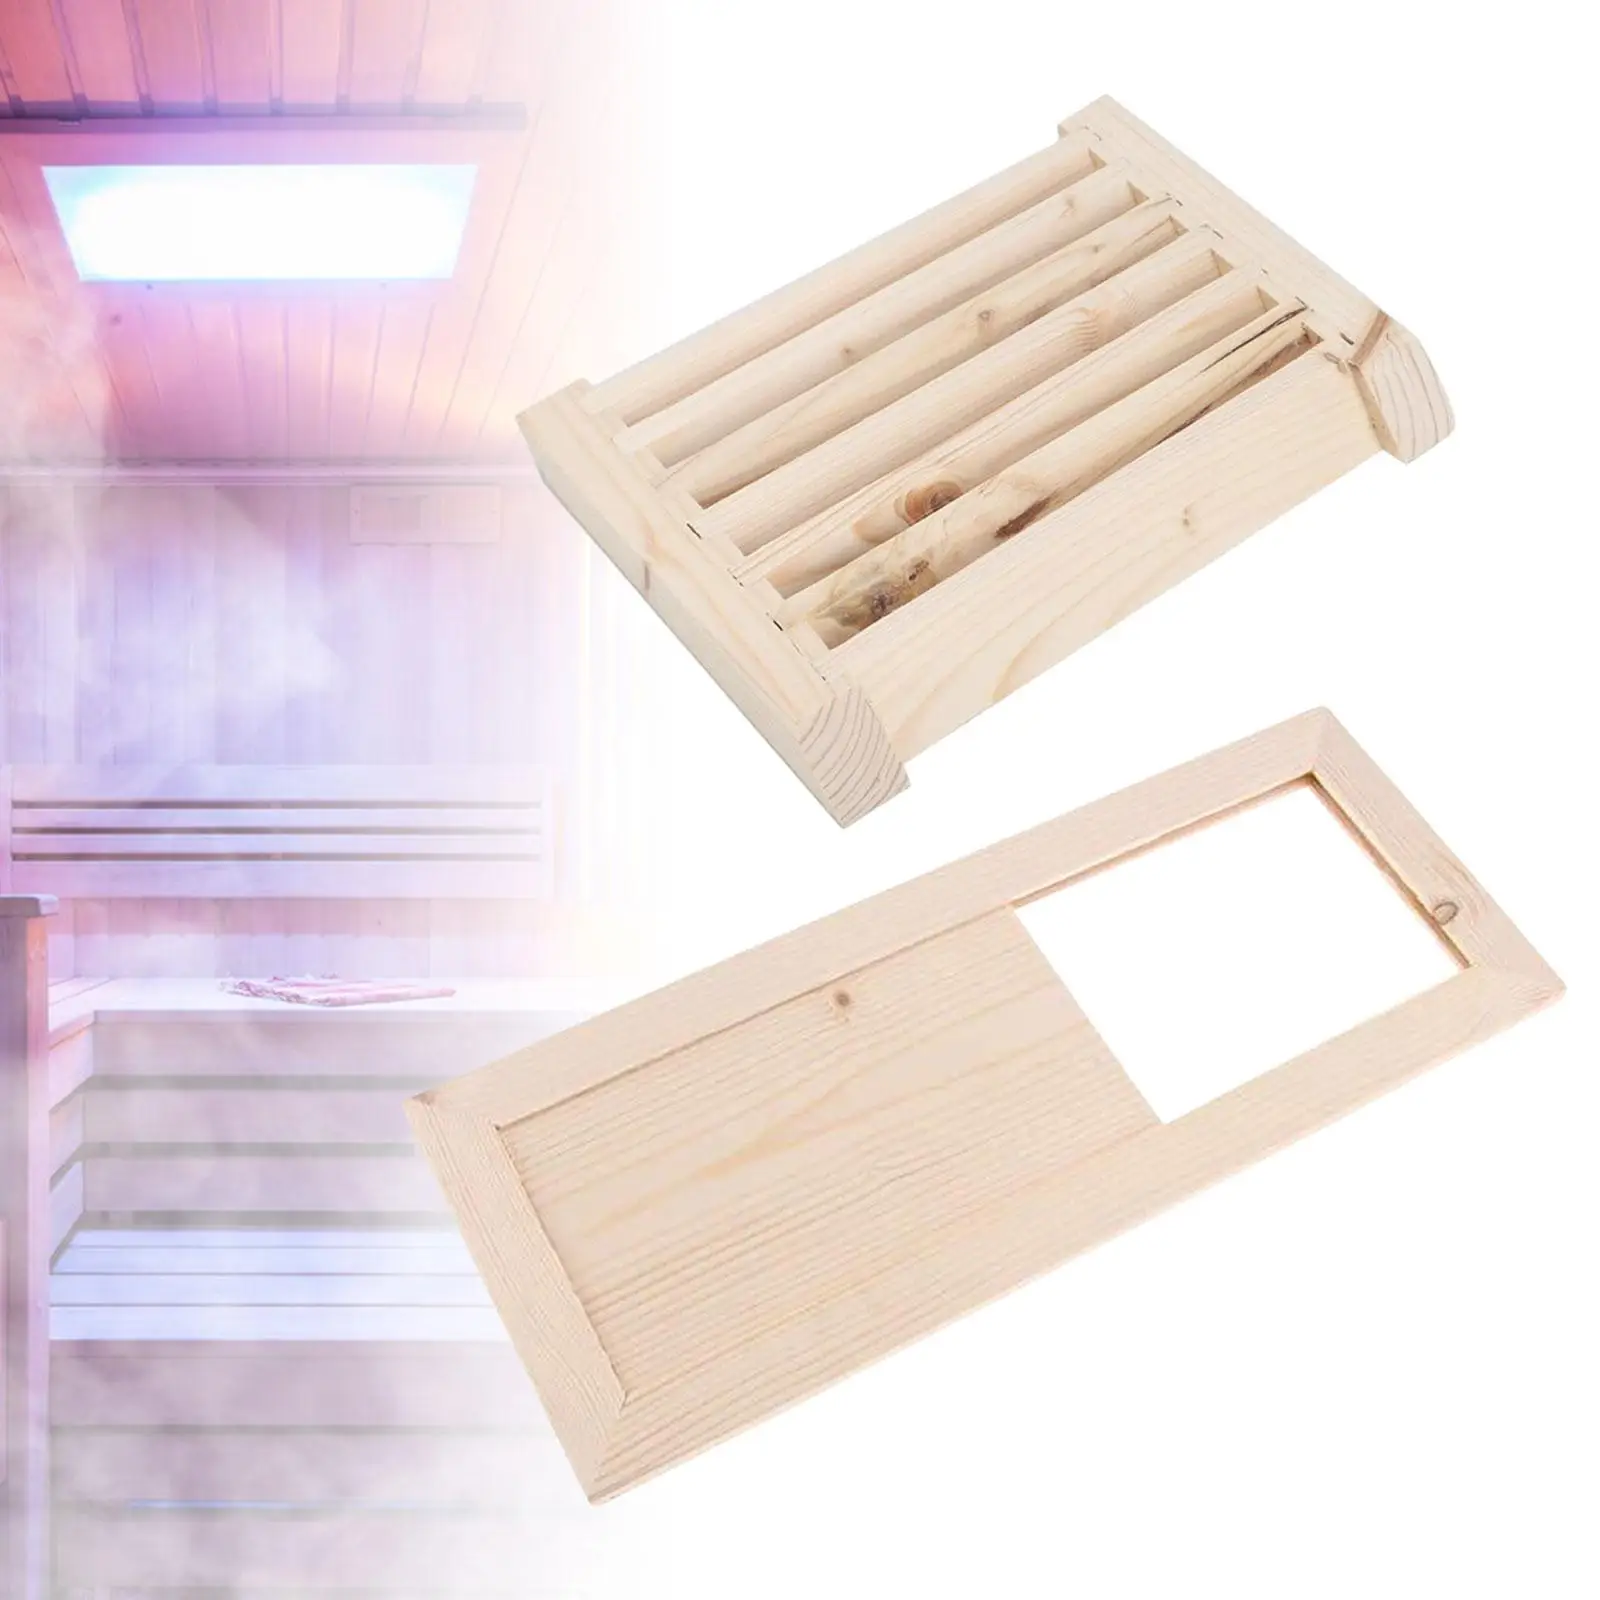 Steam Room Air Vent Grille Ventilation Louvers Steam Room Vent Air Ventilation Panel for Bathroom Bath Steam Room Swimming Pool